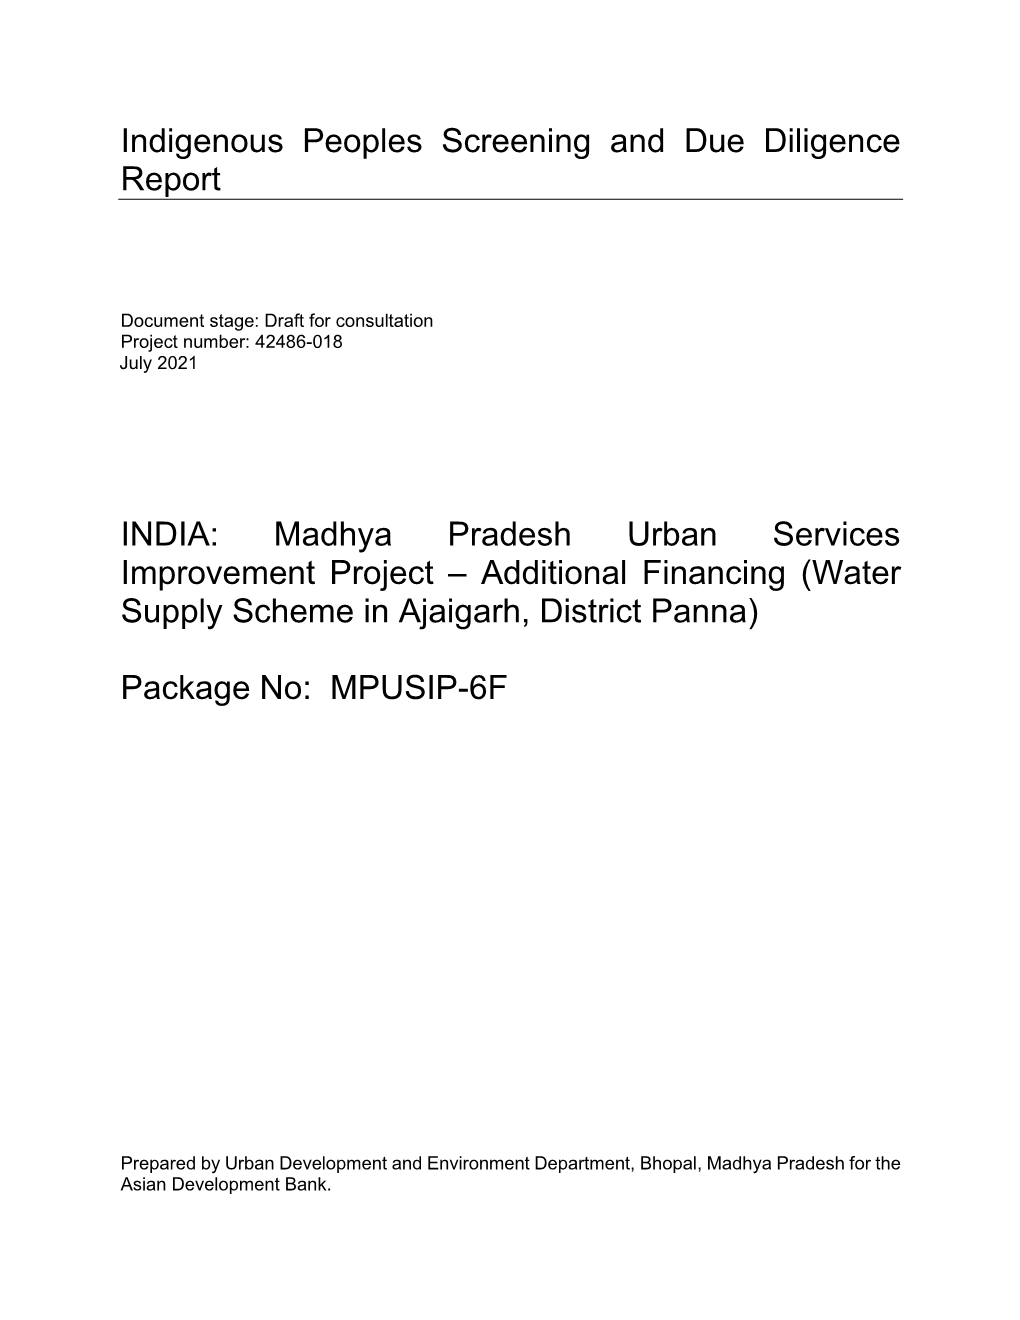 Indigenous Peoples Screening and Due Diligence Report INDIA: Madhya Pradesh Urban Services Improvement Project – Additional F